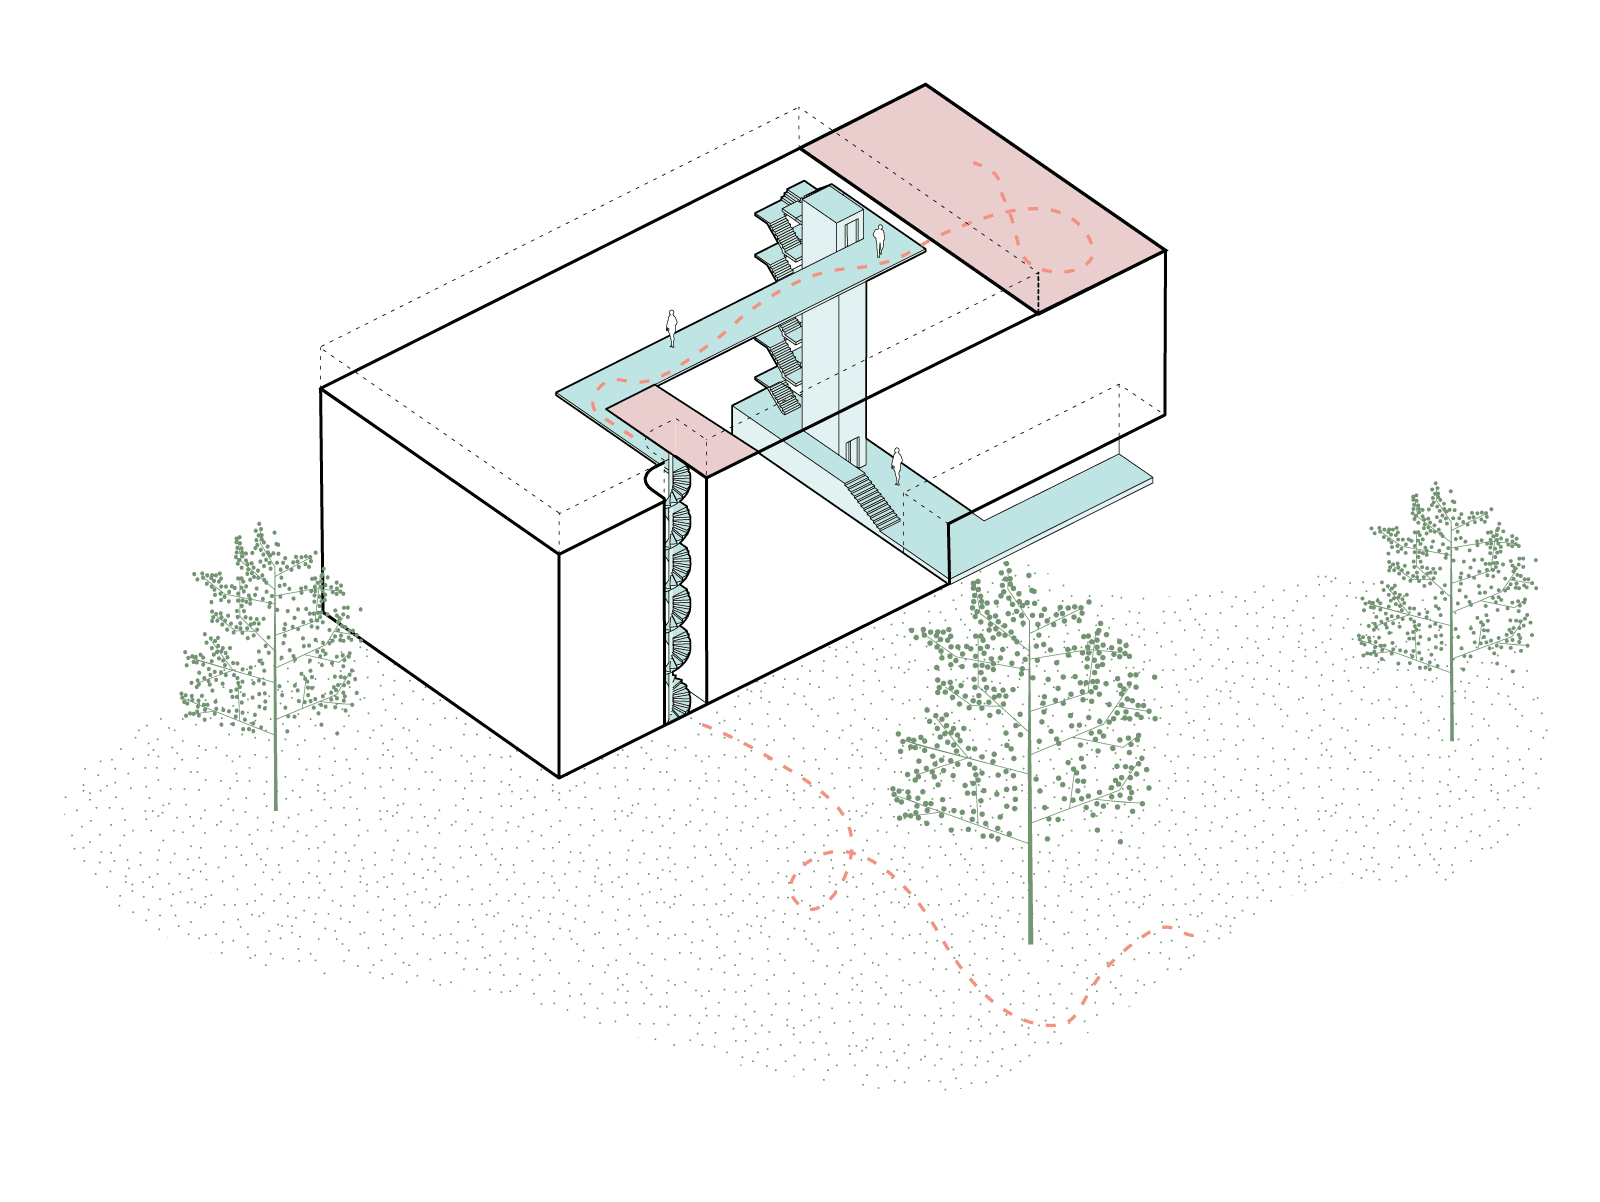 isometric scheme showing access system and collective spaces in wisselspoor utrecht project by beta architect amsterdam evert klinkenberg gus auguste van oppen